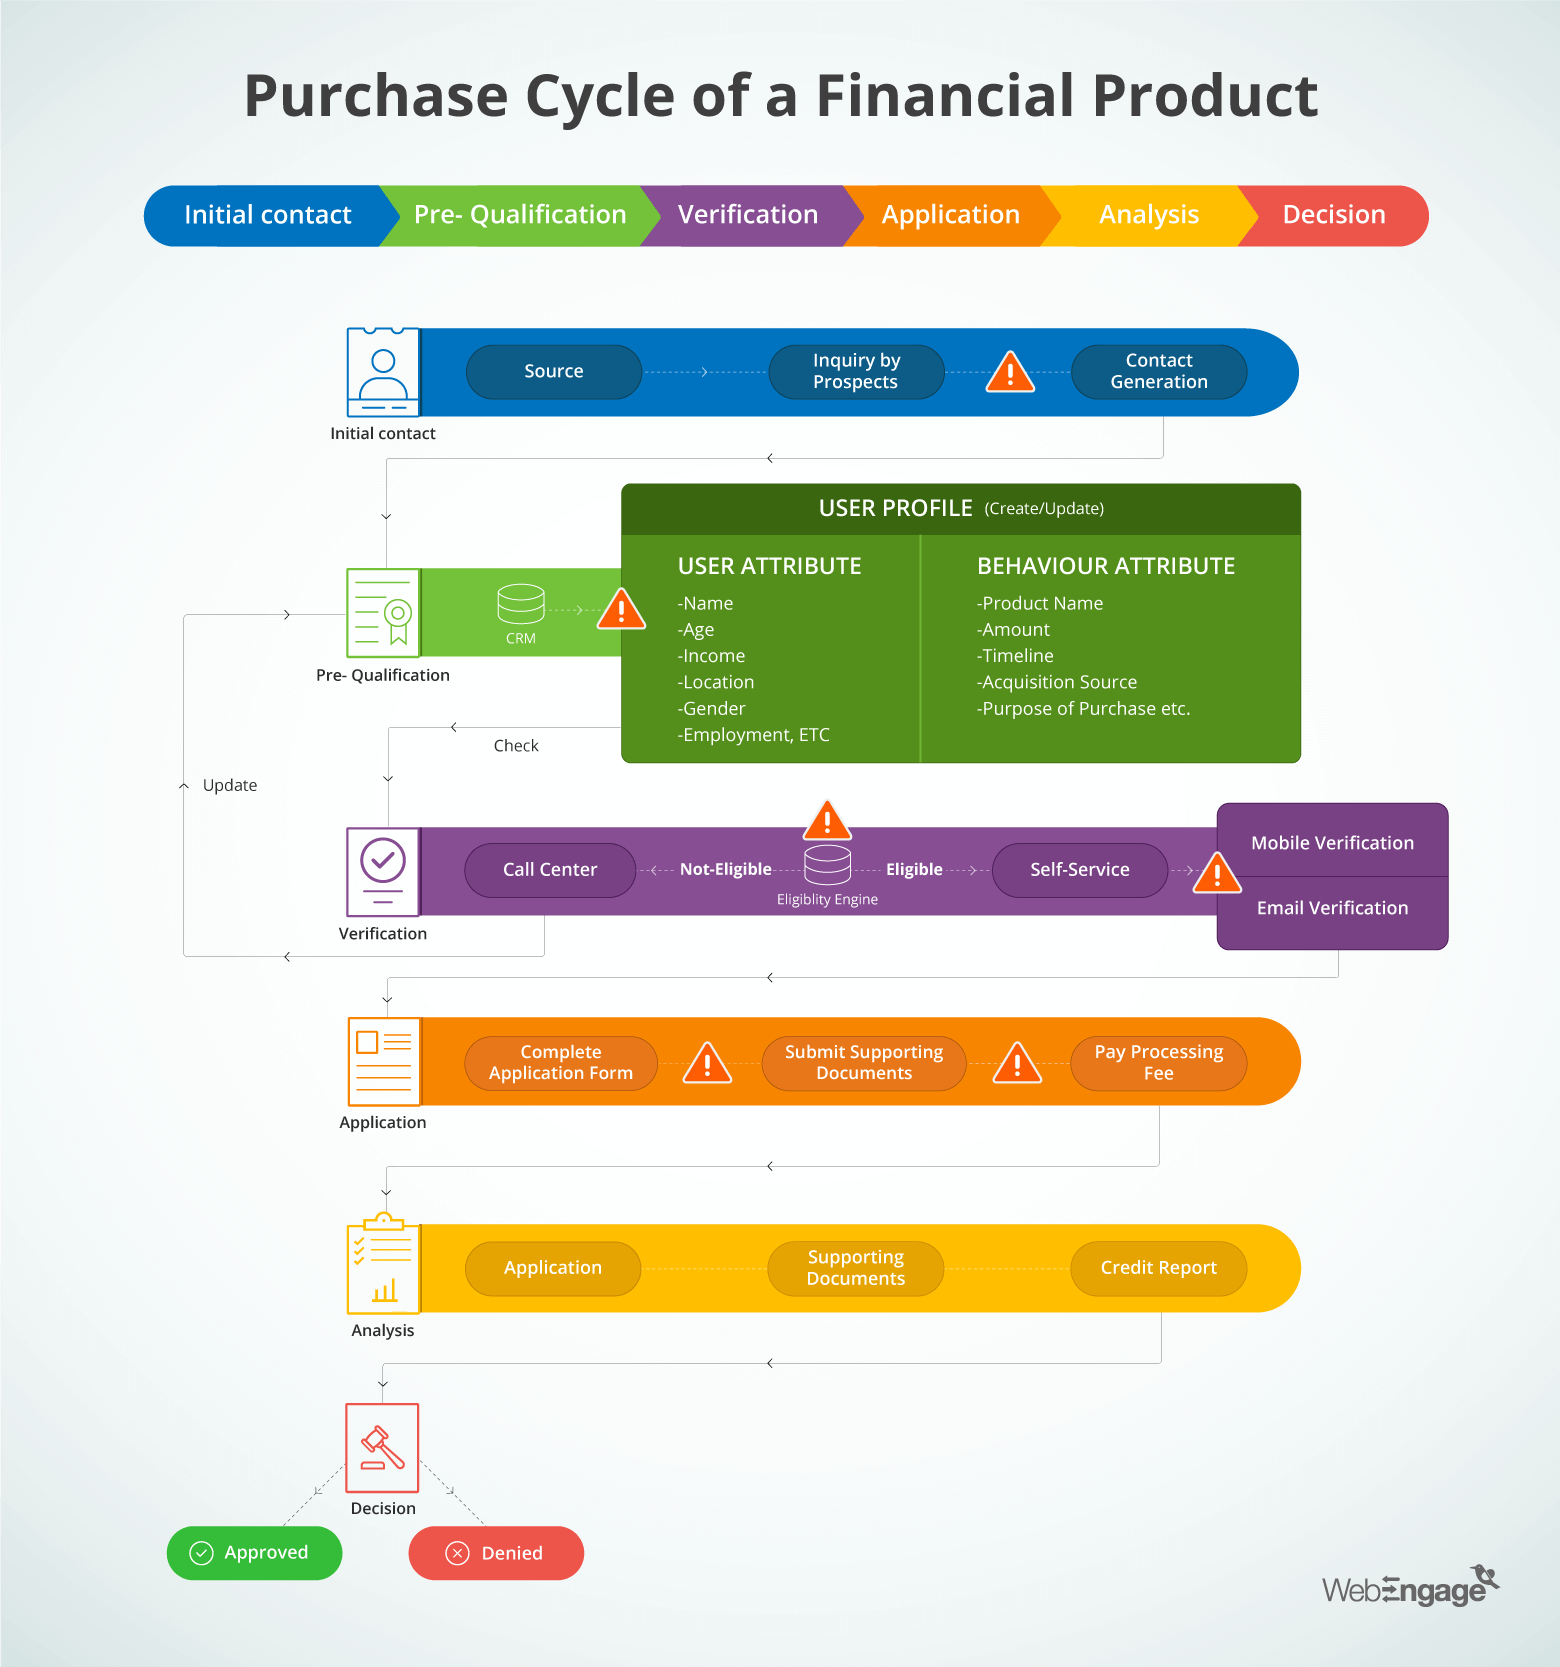 Leakages in the Purchase Cycle flow of Financial Product